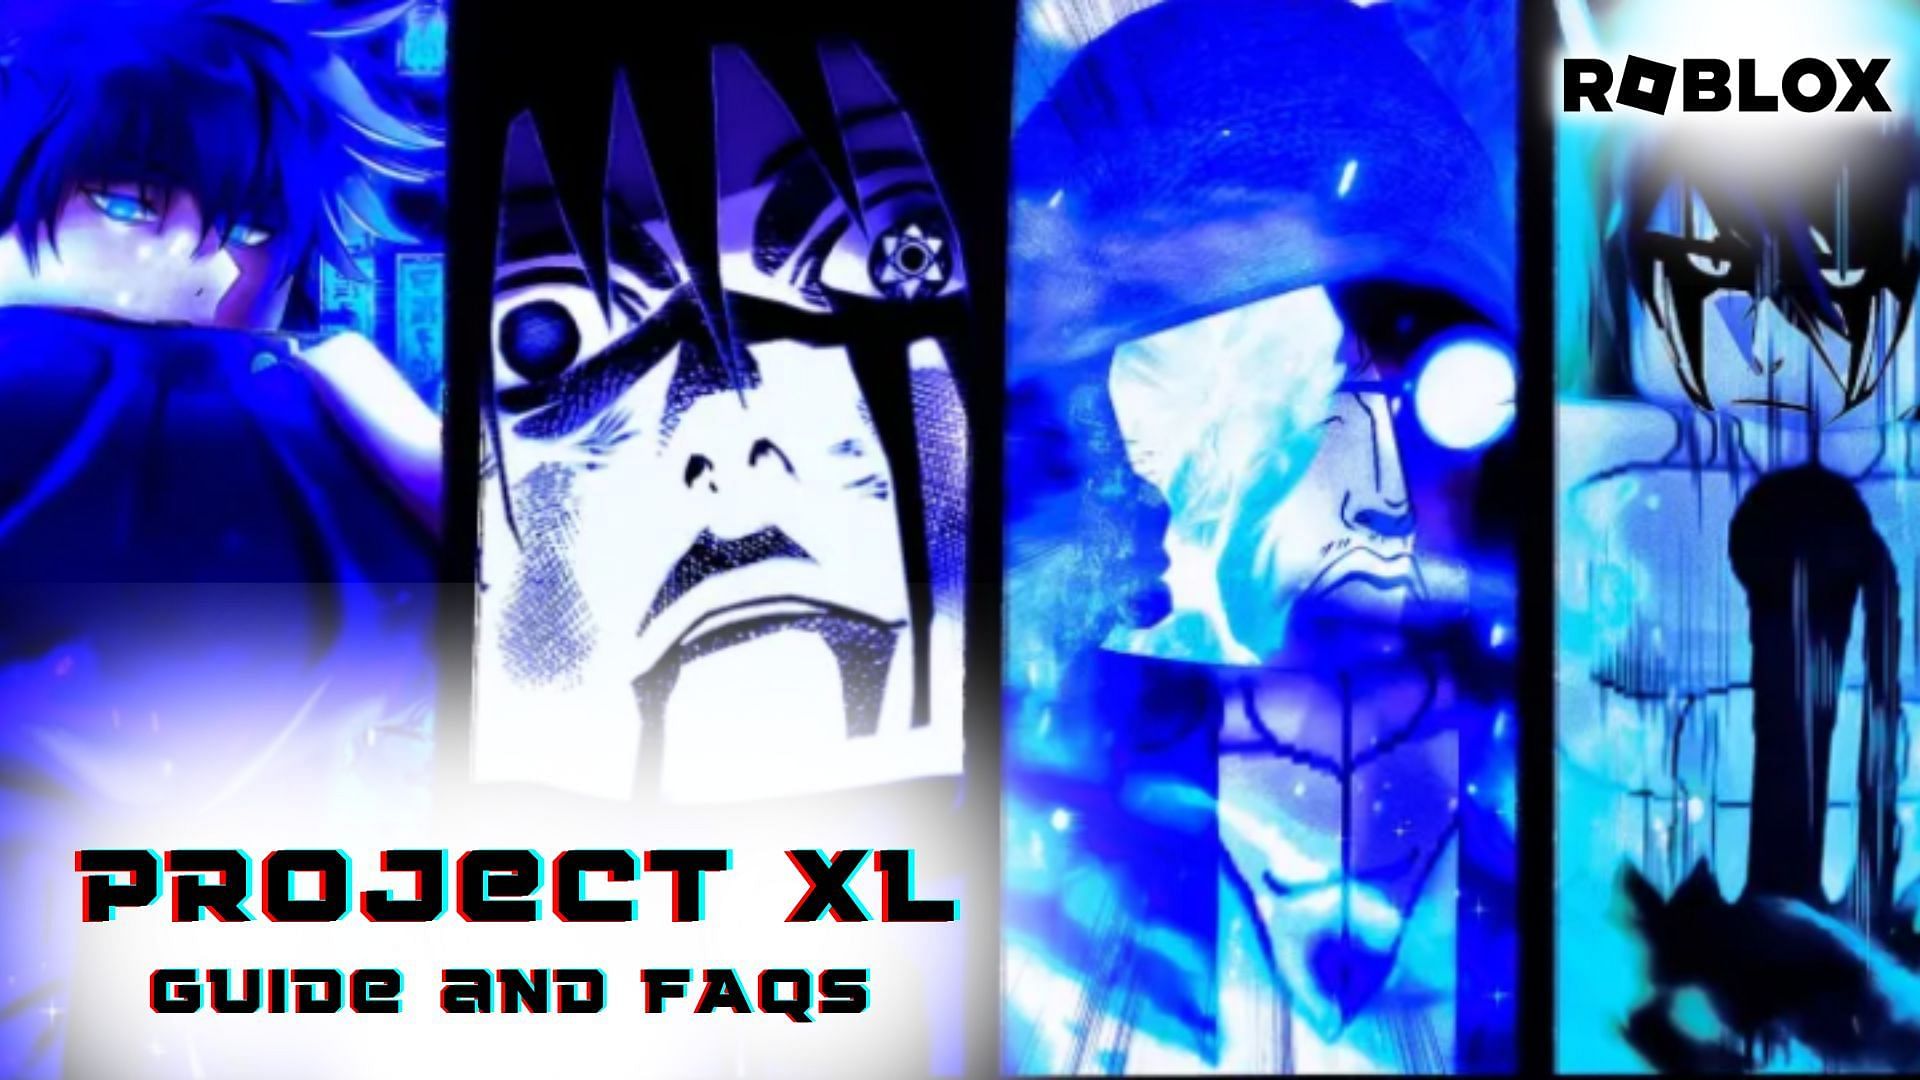 Project XL guide